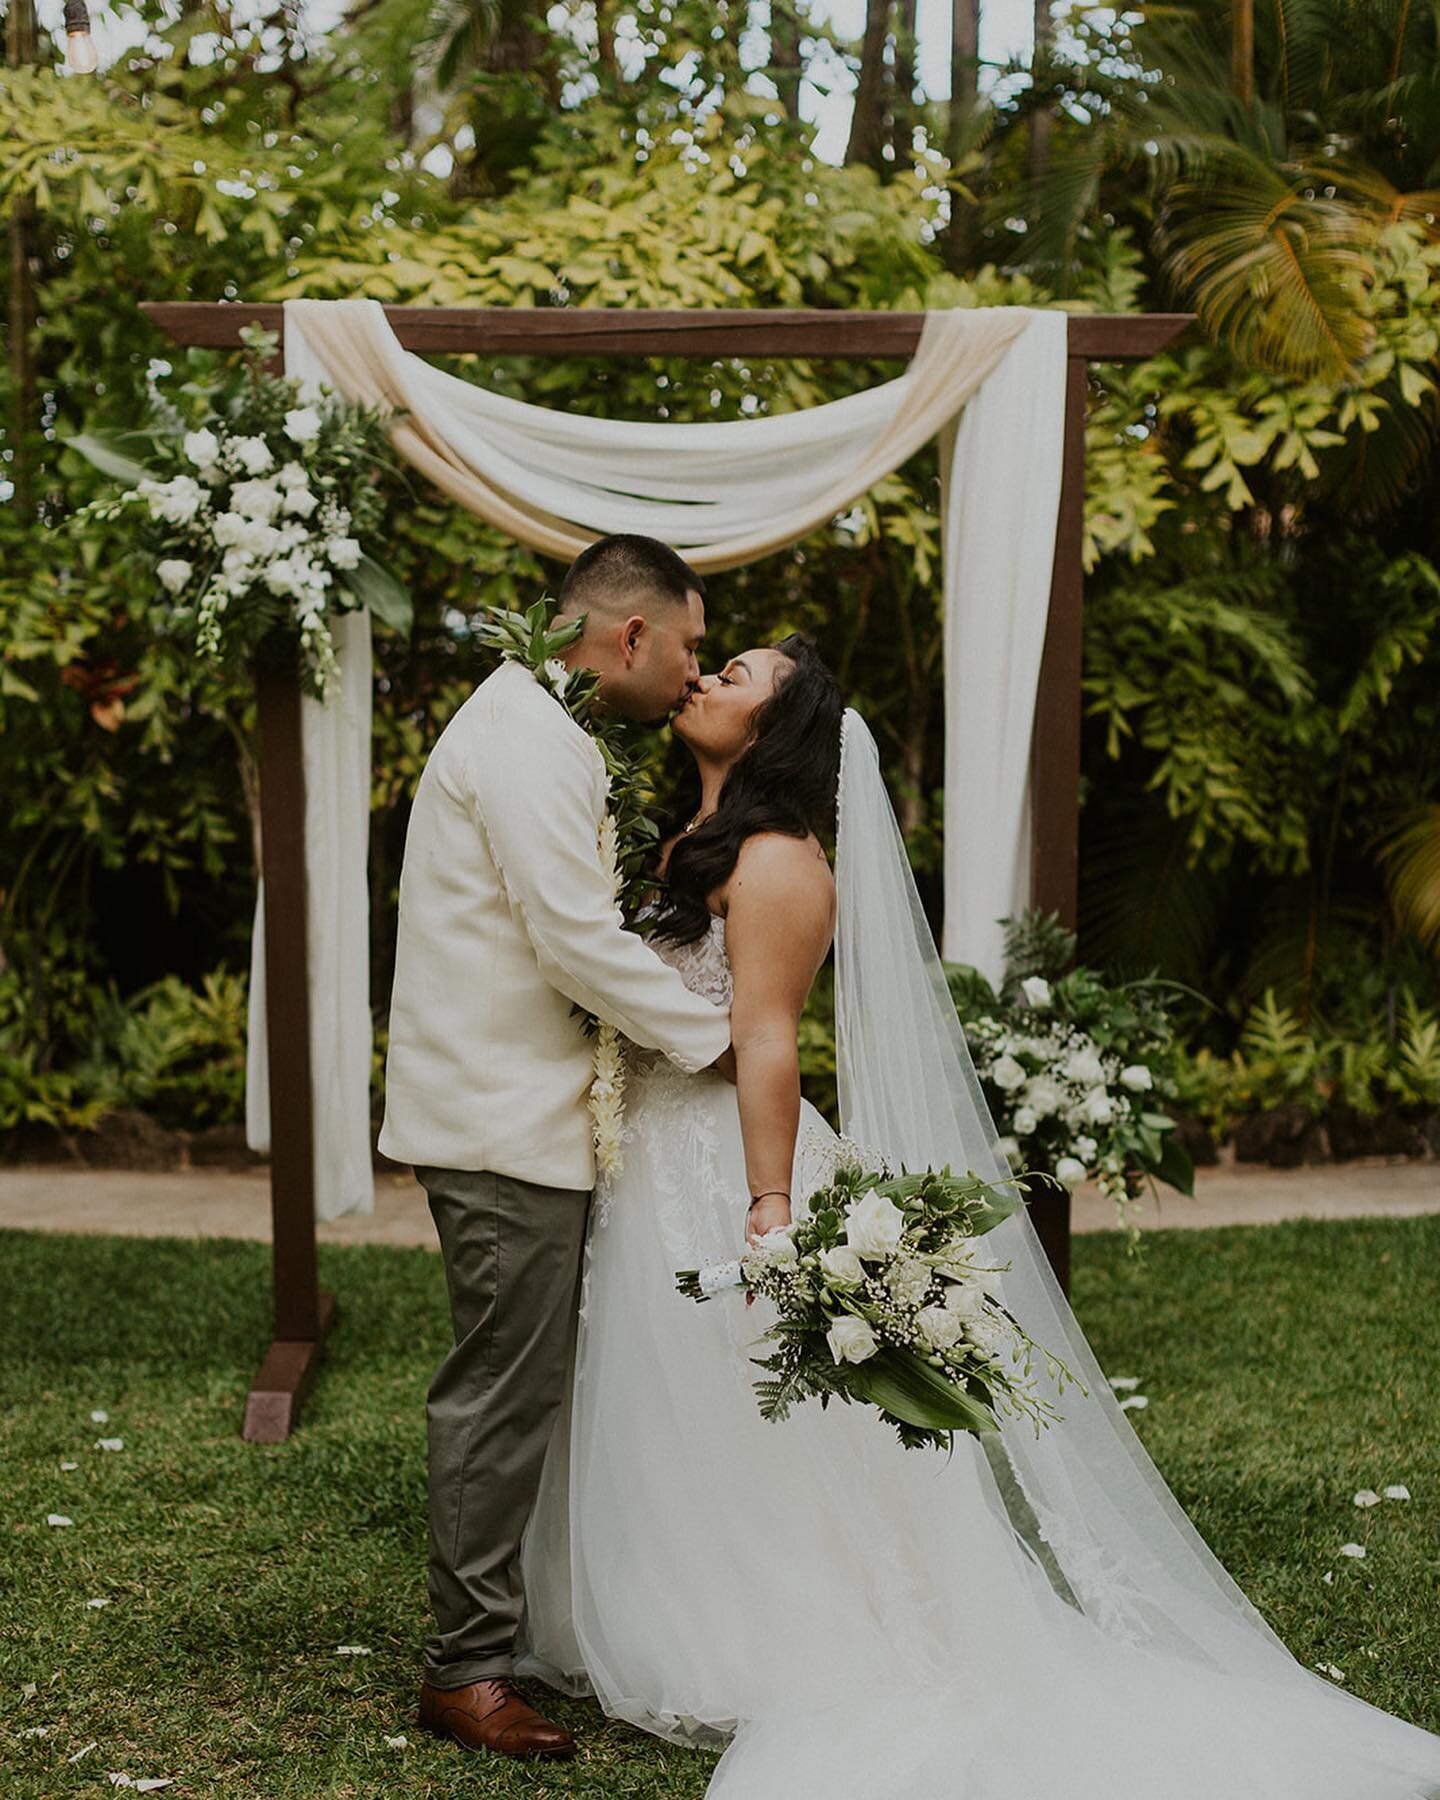 swooning over this beautiful day  and these two all over again 😍🥹

Planning: @jasperandlace 
Florist: @jasperandlace 
Photography: @taylorrwalstonphoto 
Table Settings: @withloveandgrace.hnl 
Catering: @enfuegogrillhawaii 
Cake: @acakelife 
Hair: @